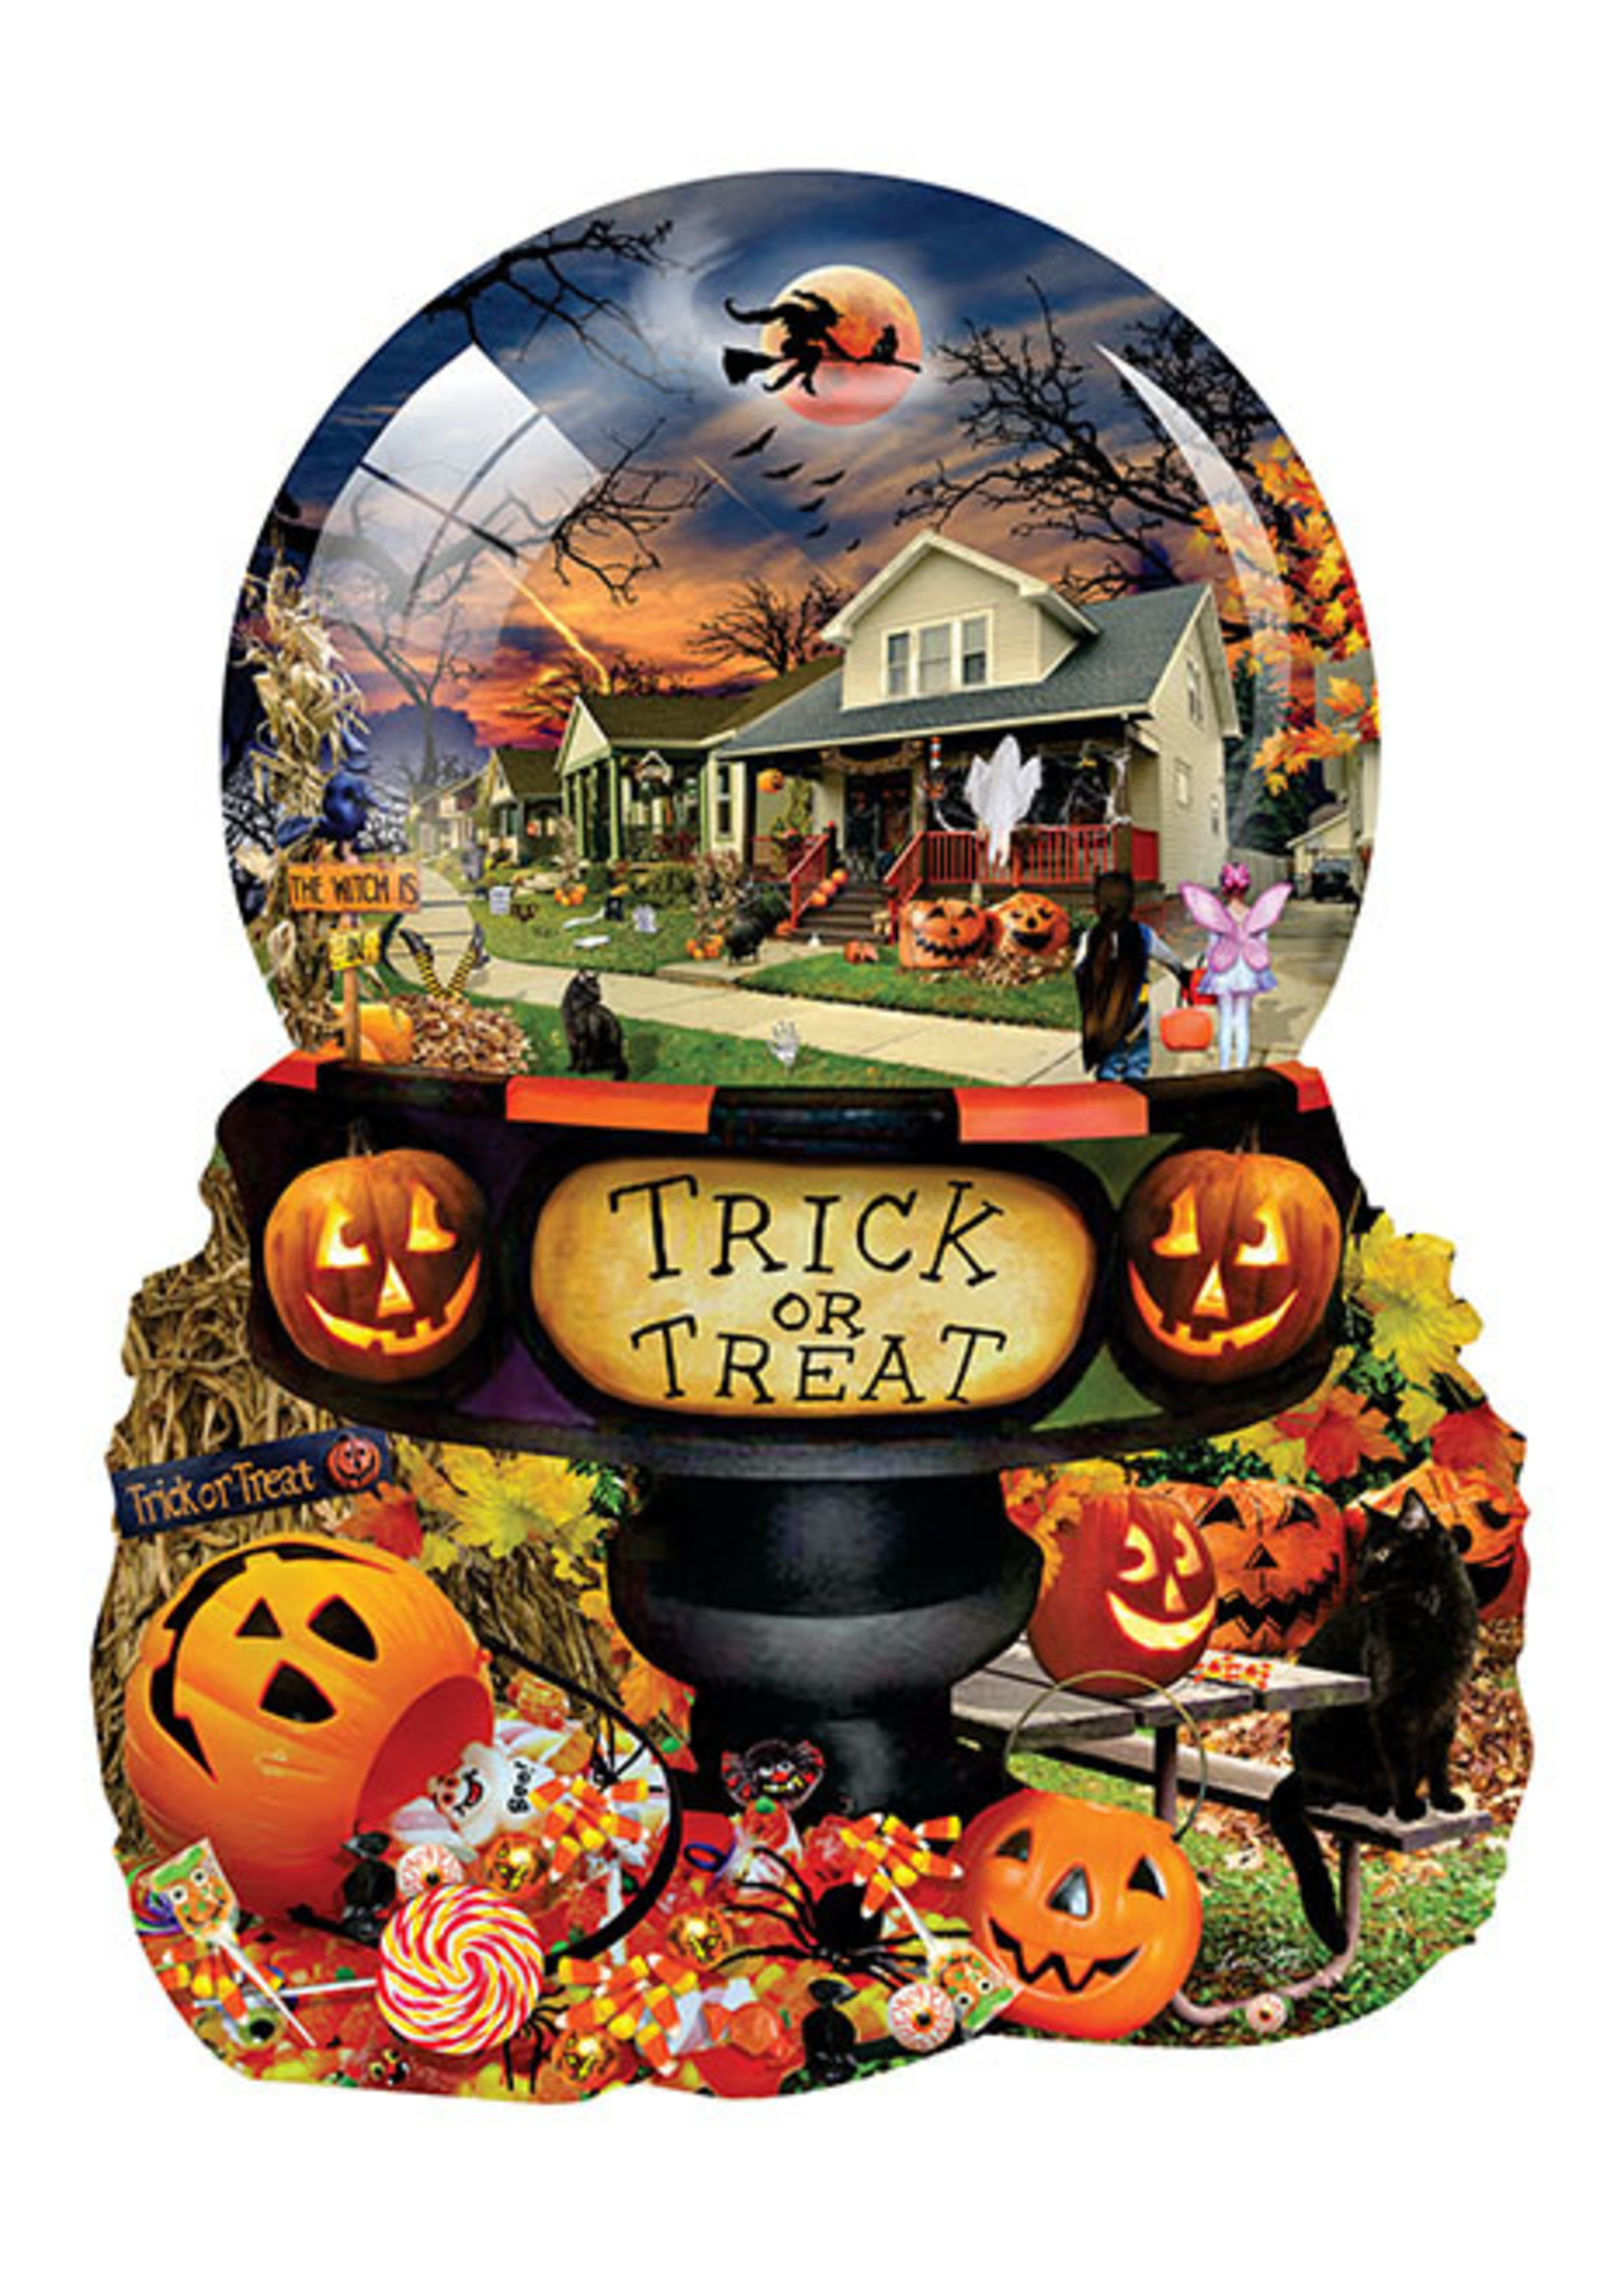 Sunsout Halloween Globe Special Shaped Puzzle 1000 Pieces